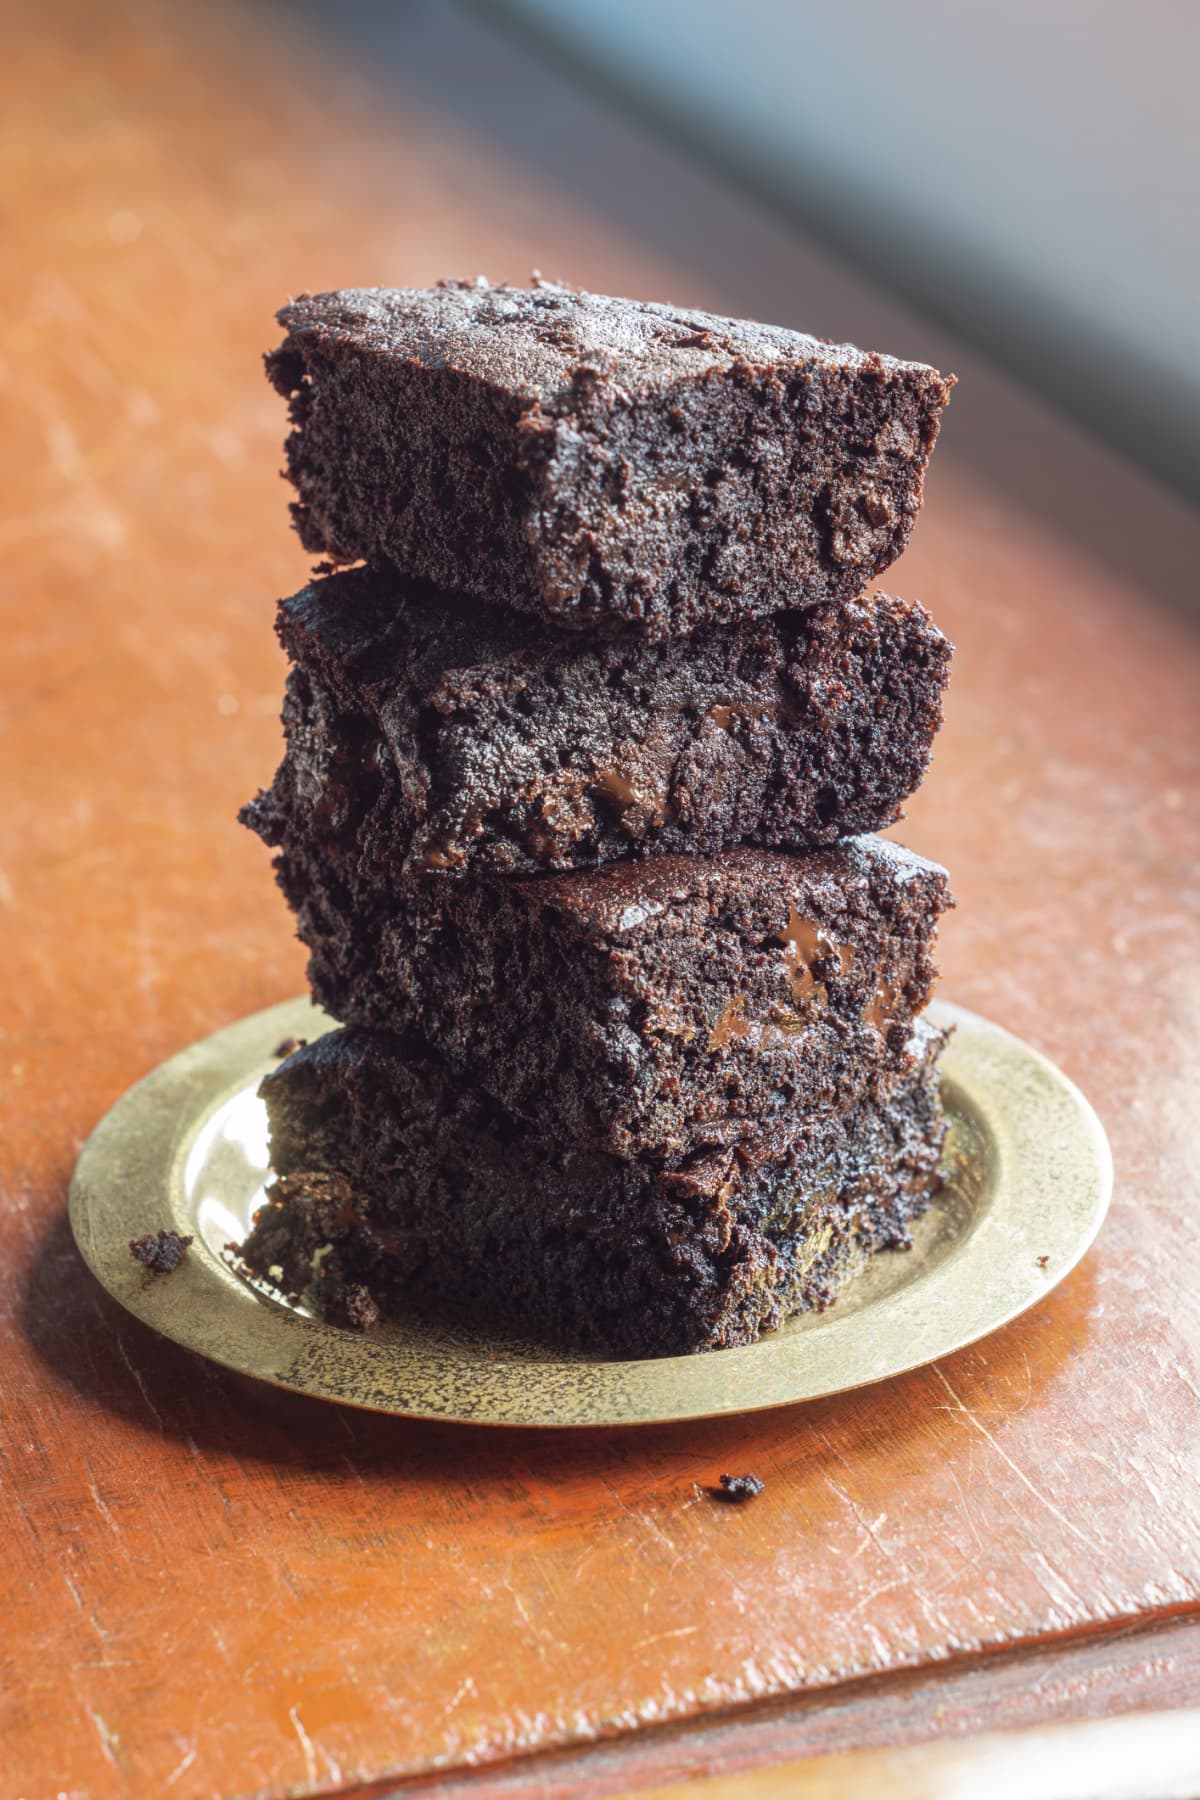 A stack of brownies on a plate